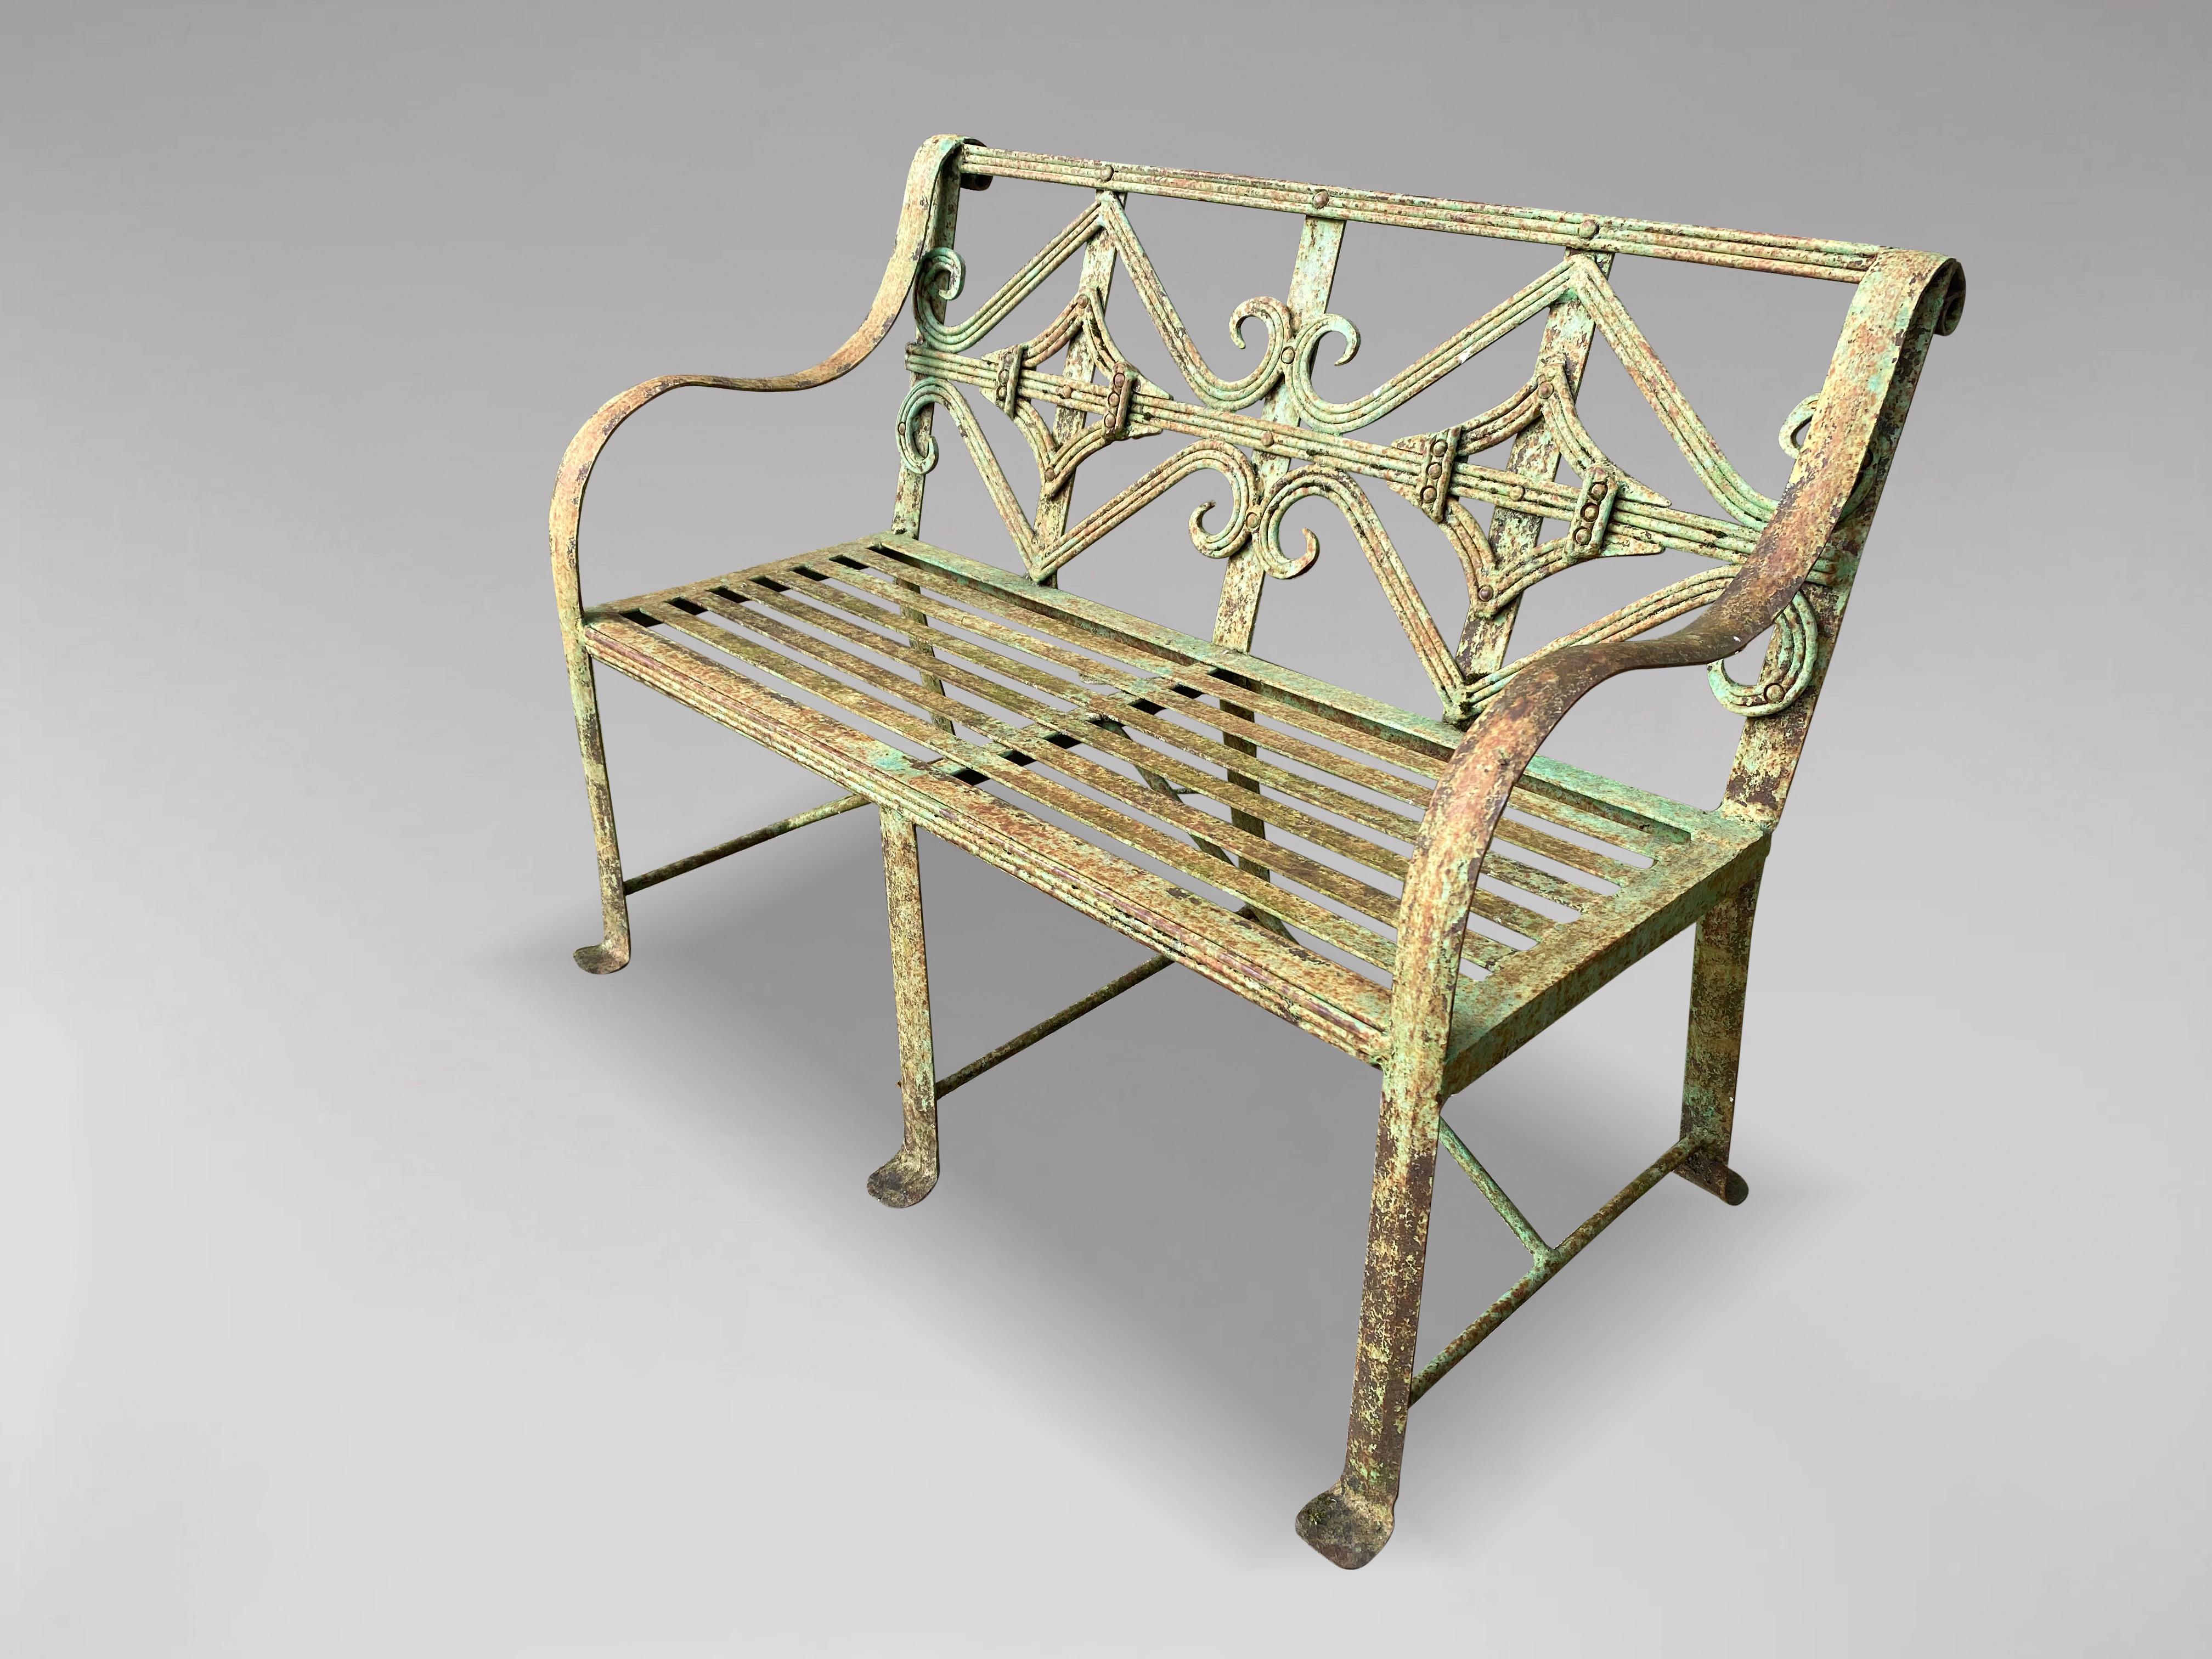 Hand-Crafted 19th Century Green Painted Wrought Iron Child's Garden Suite